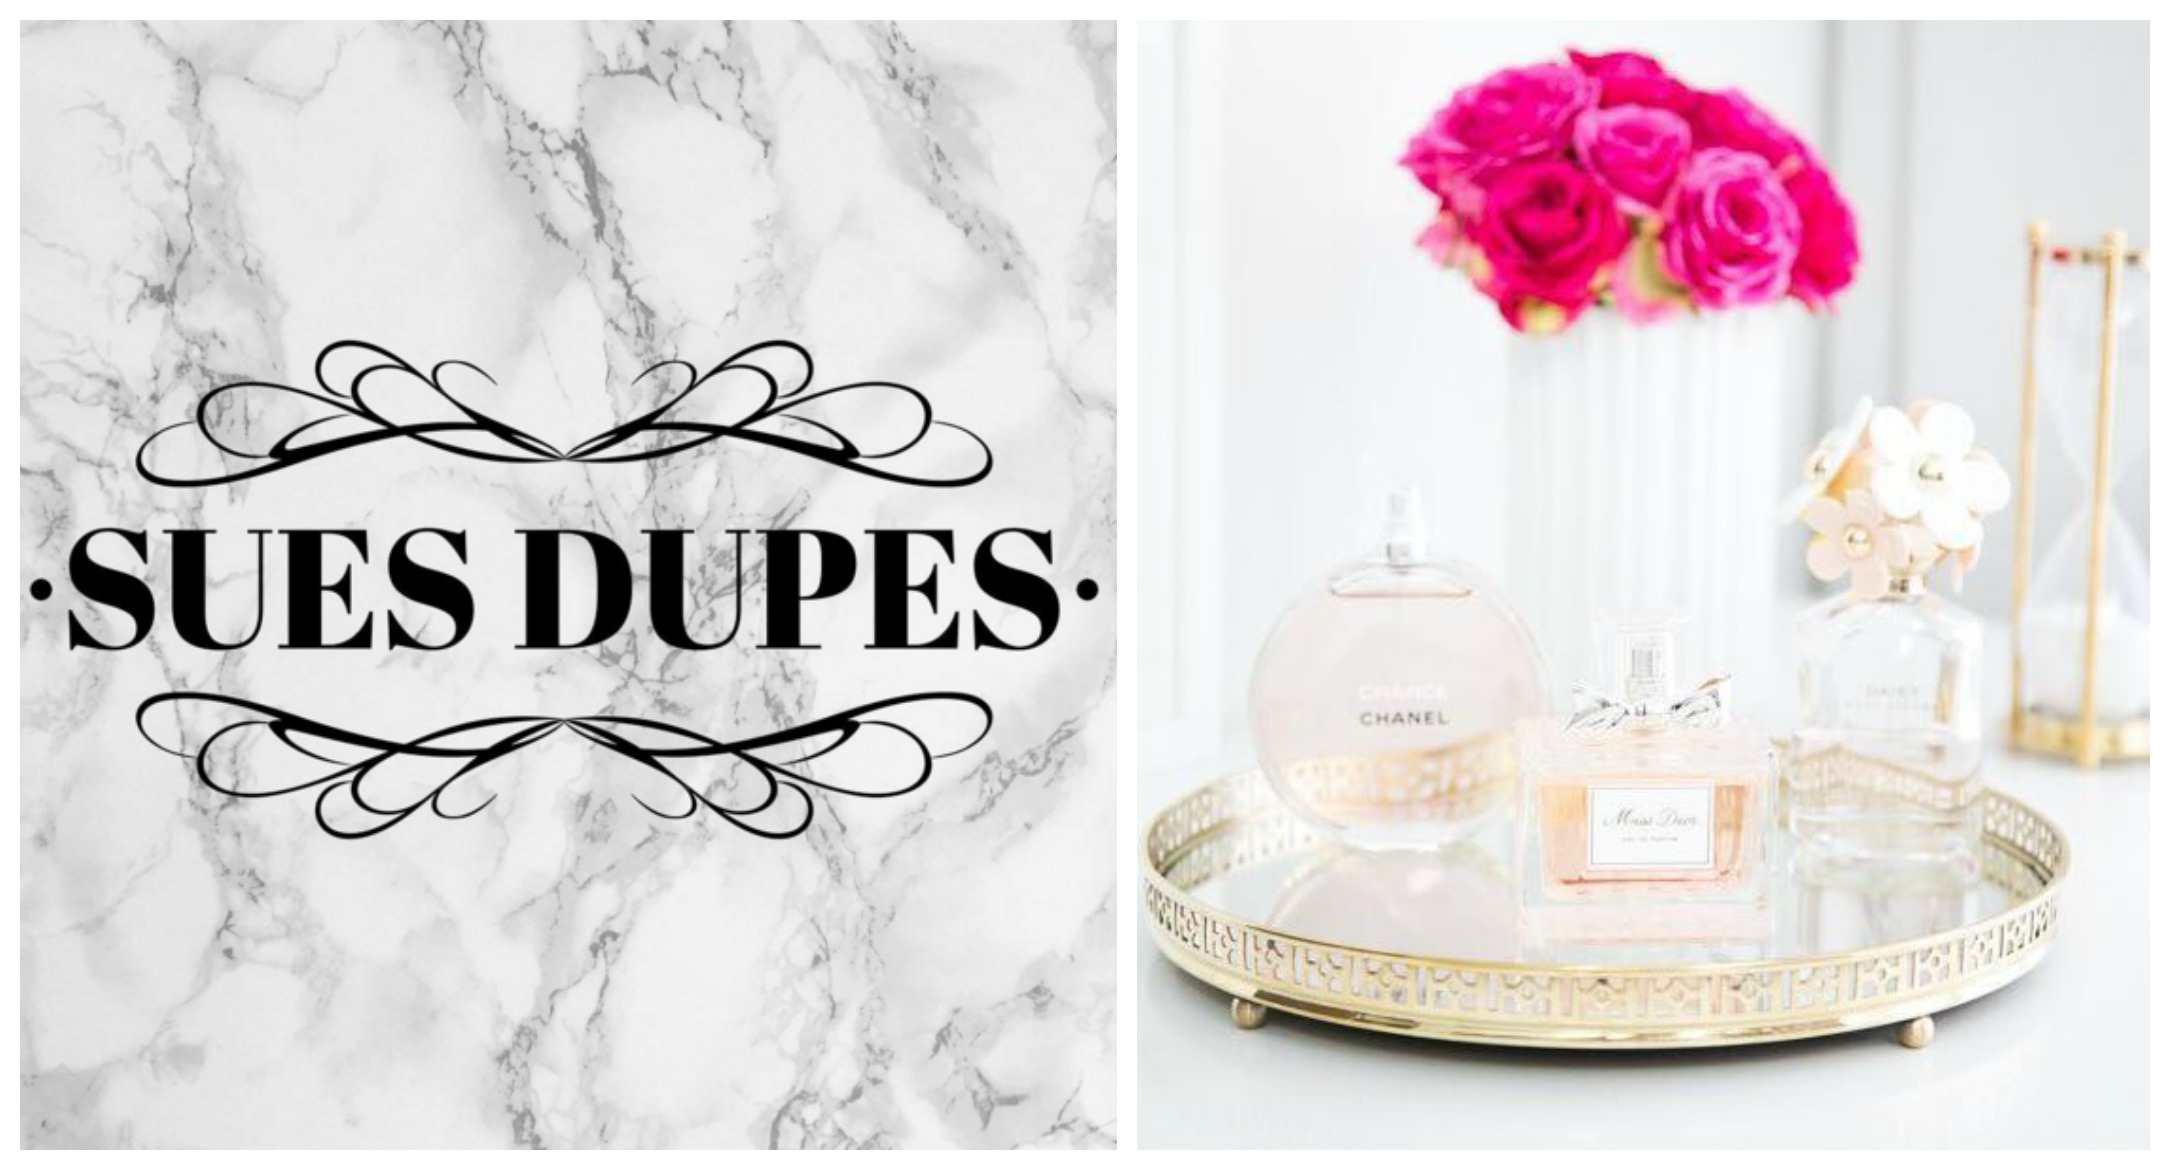 Perfume Dupe: Chanel Coco Mademoiselle | So Sue Me